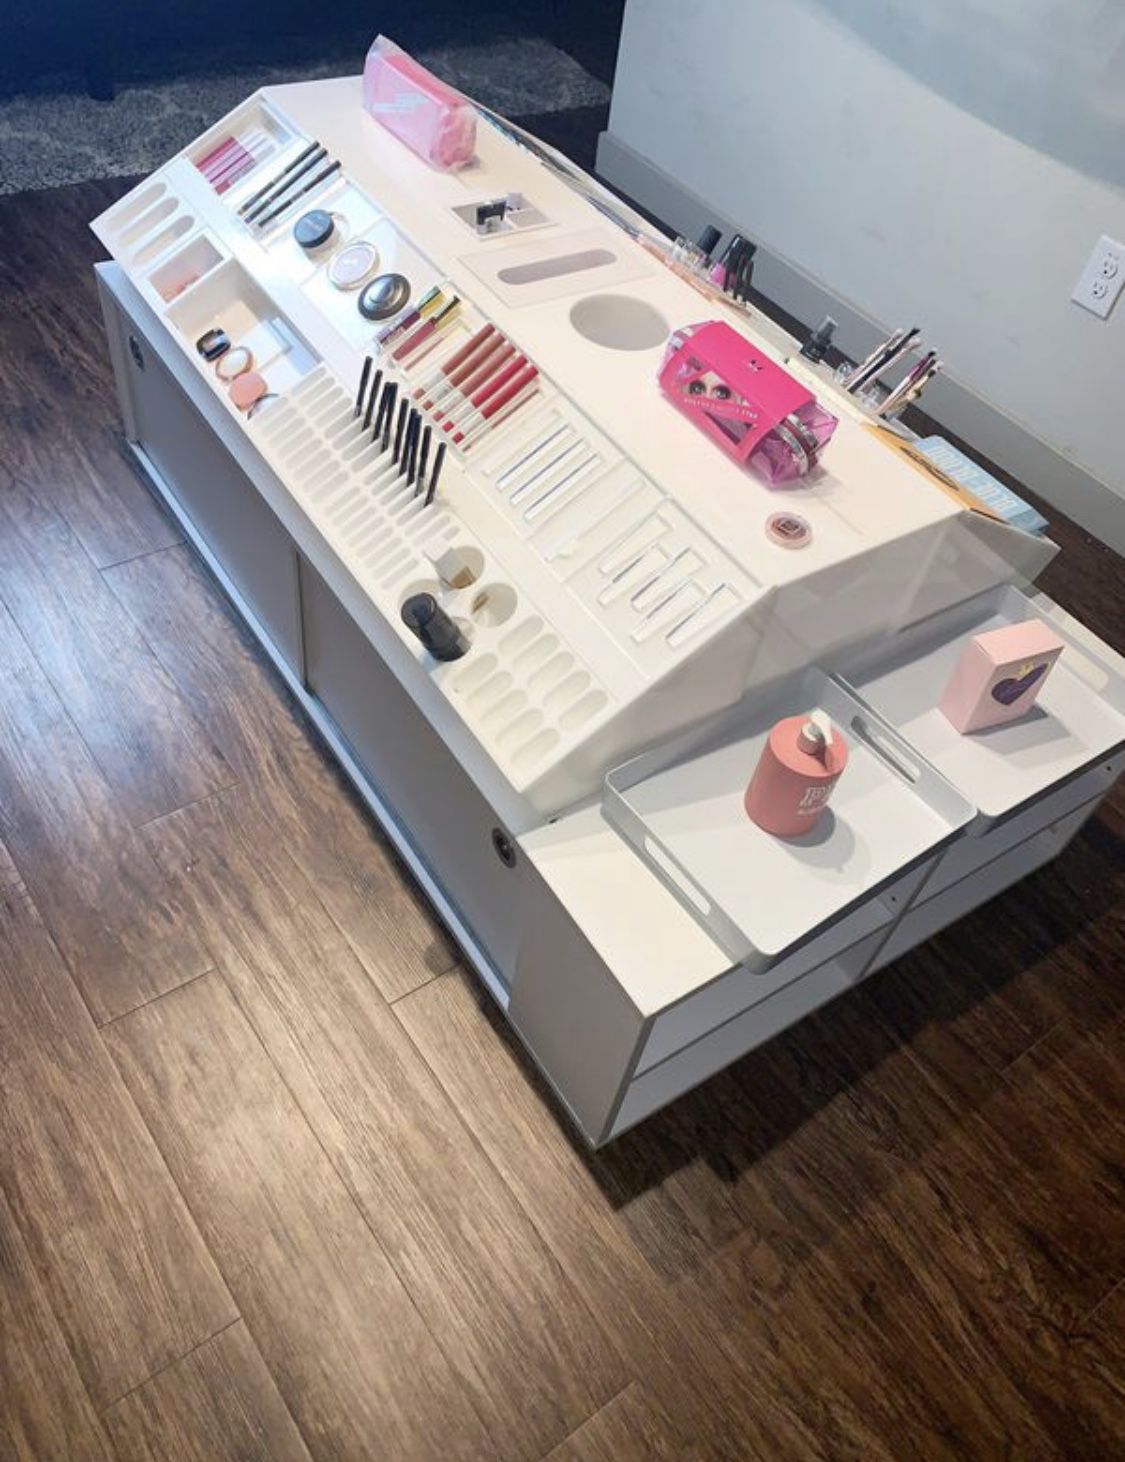 Makeup stand display / organizer with storage